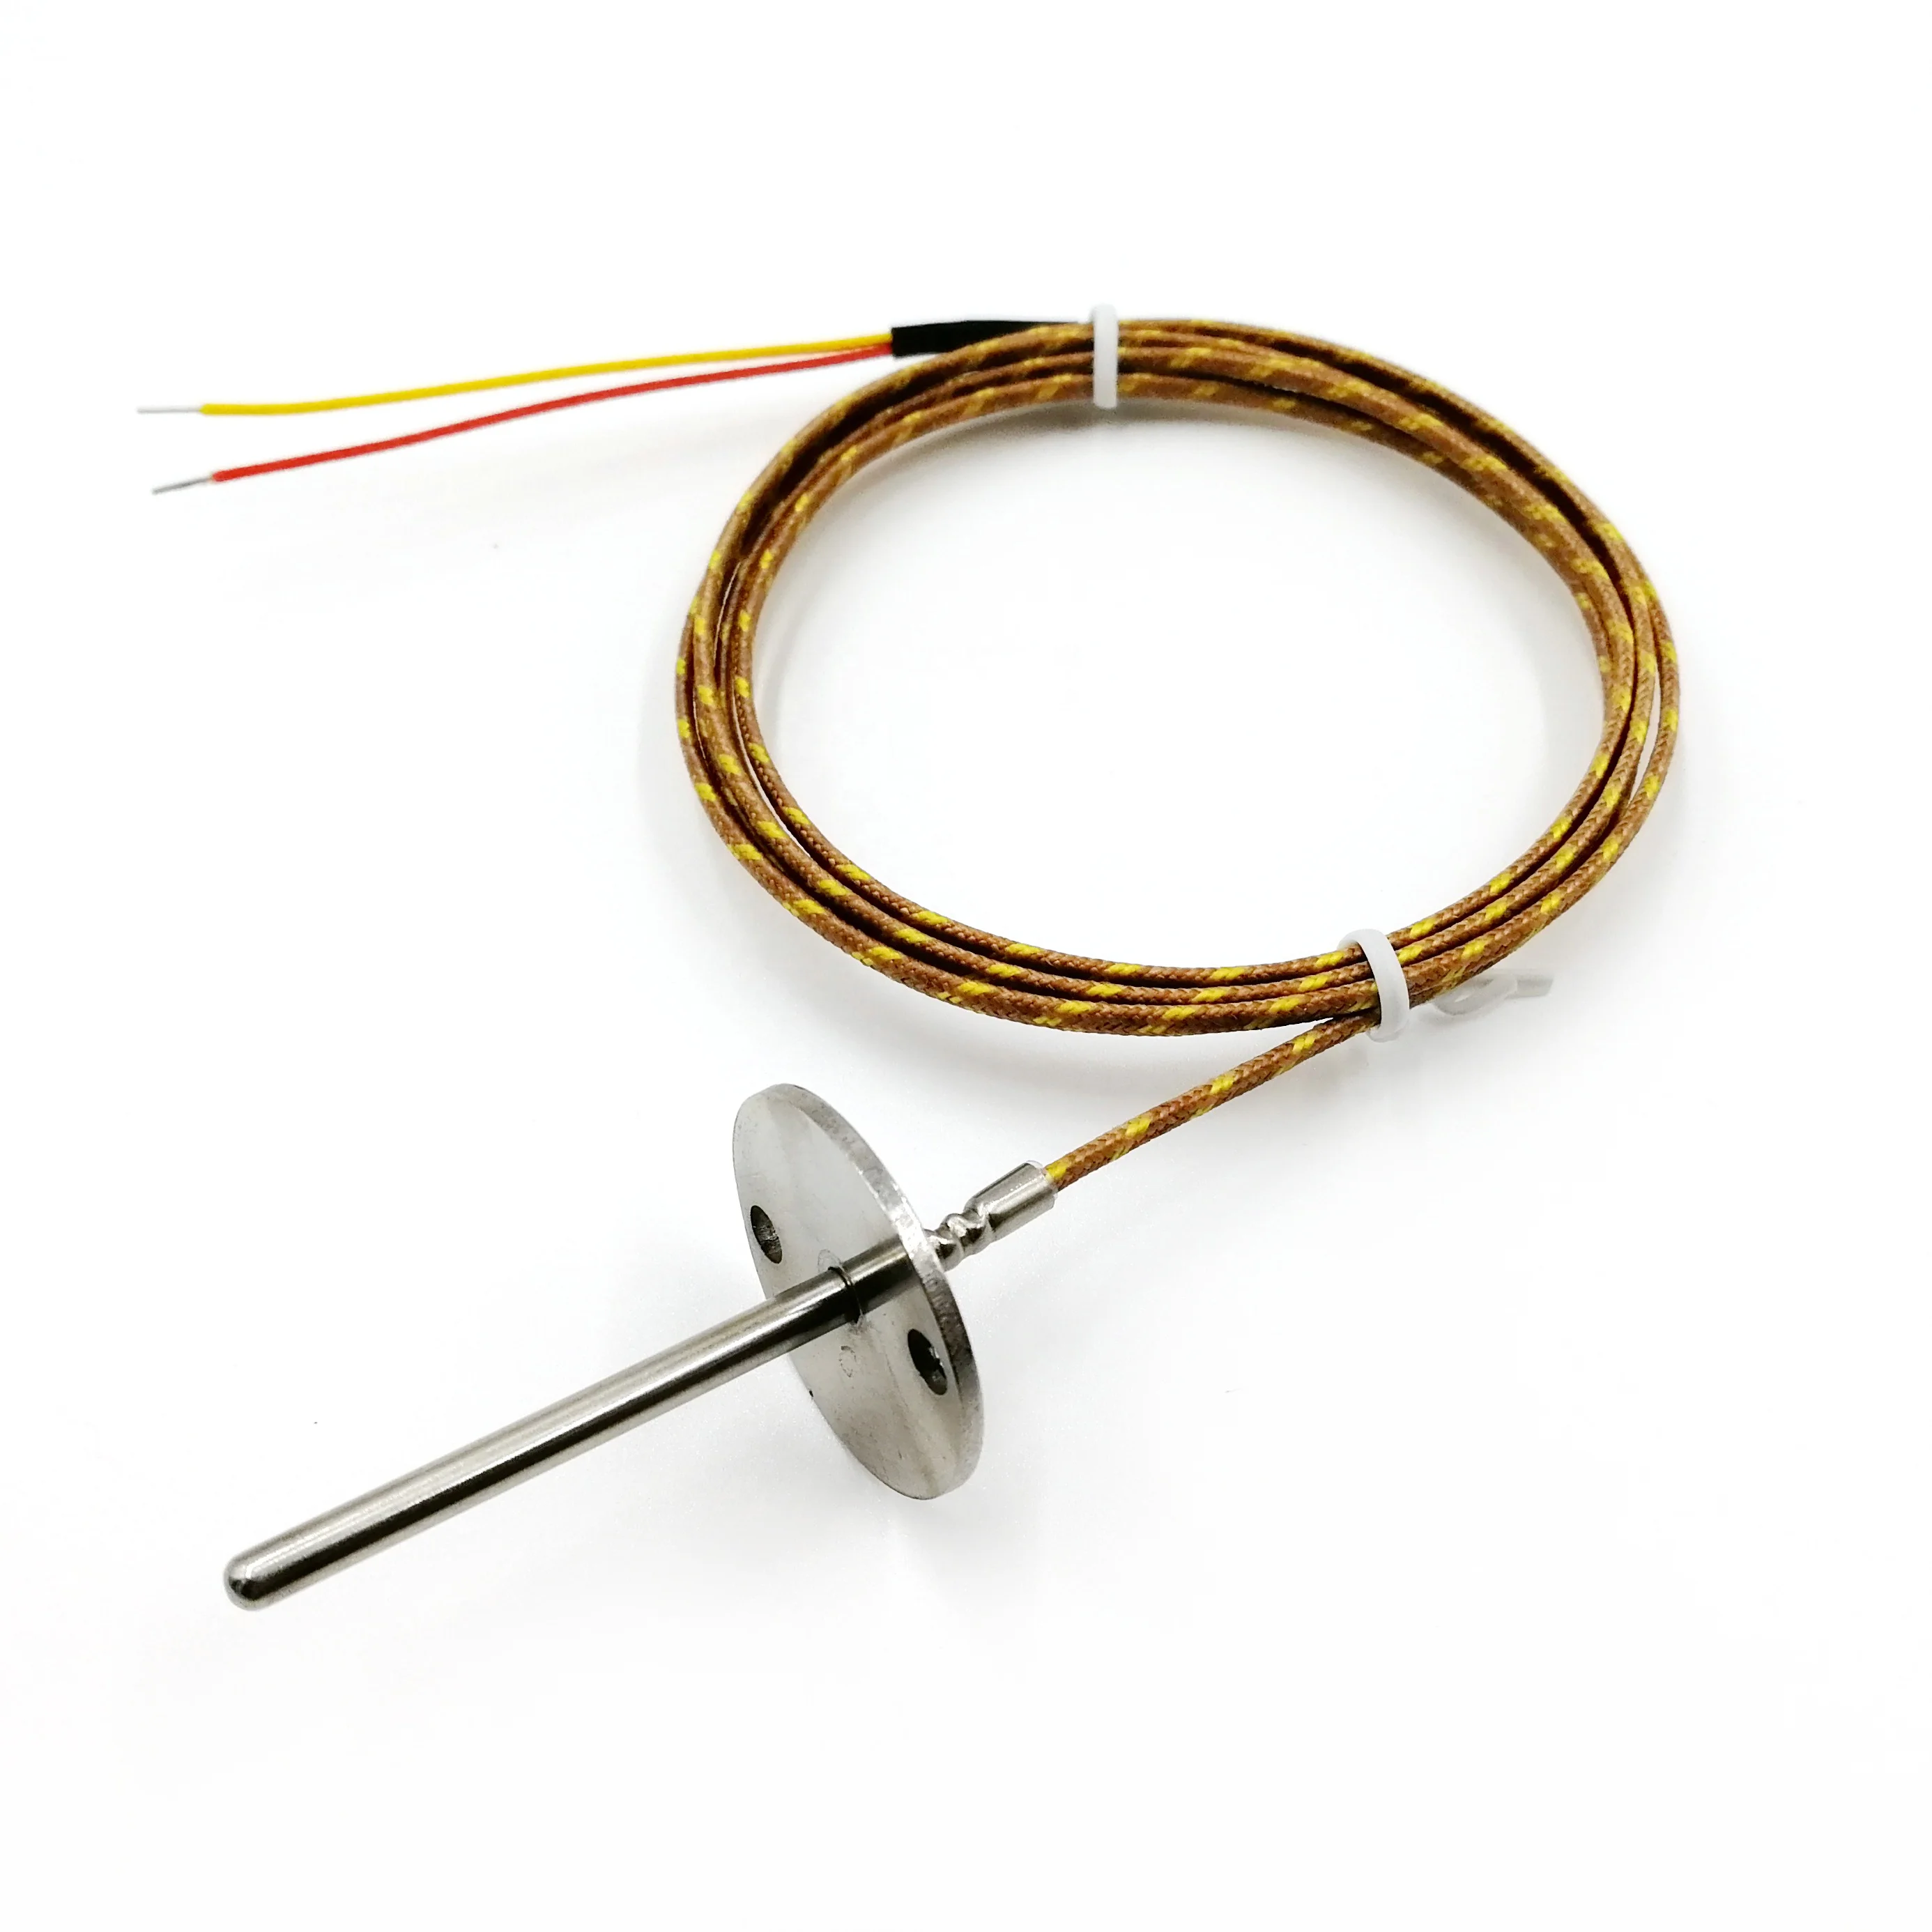 Special for sale online Thermocouple J Type Temperature Sensors With 3m Lead and Connector 